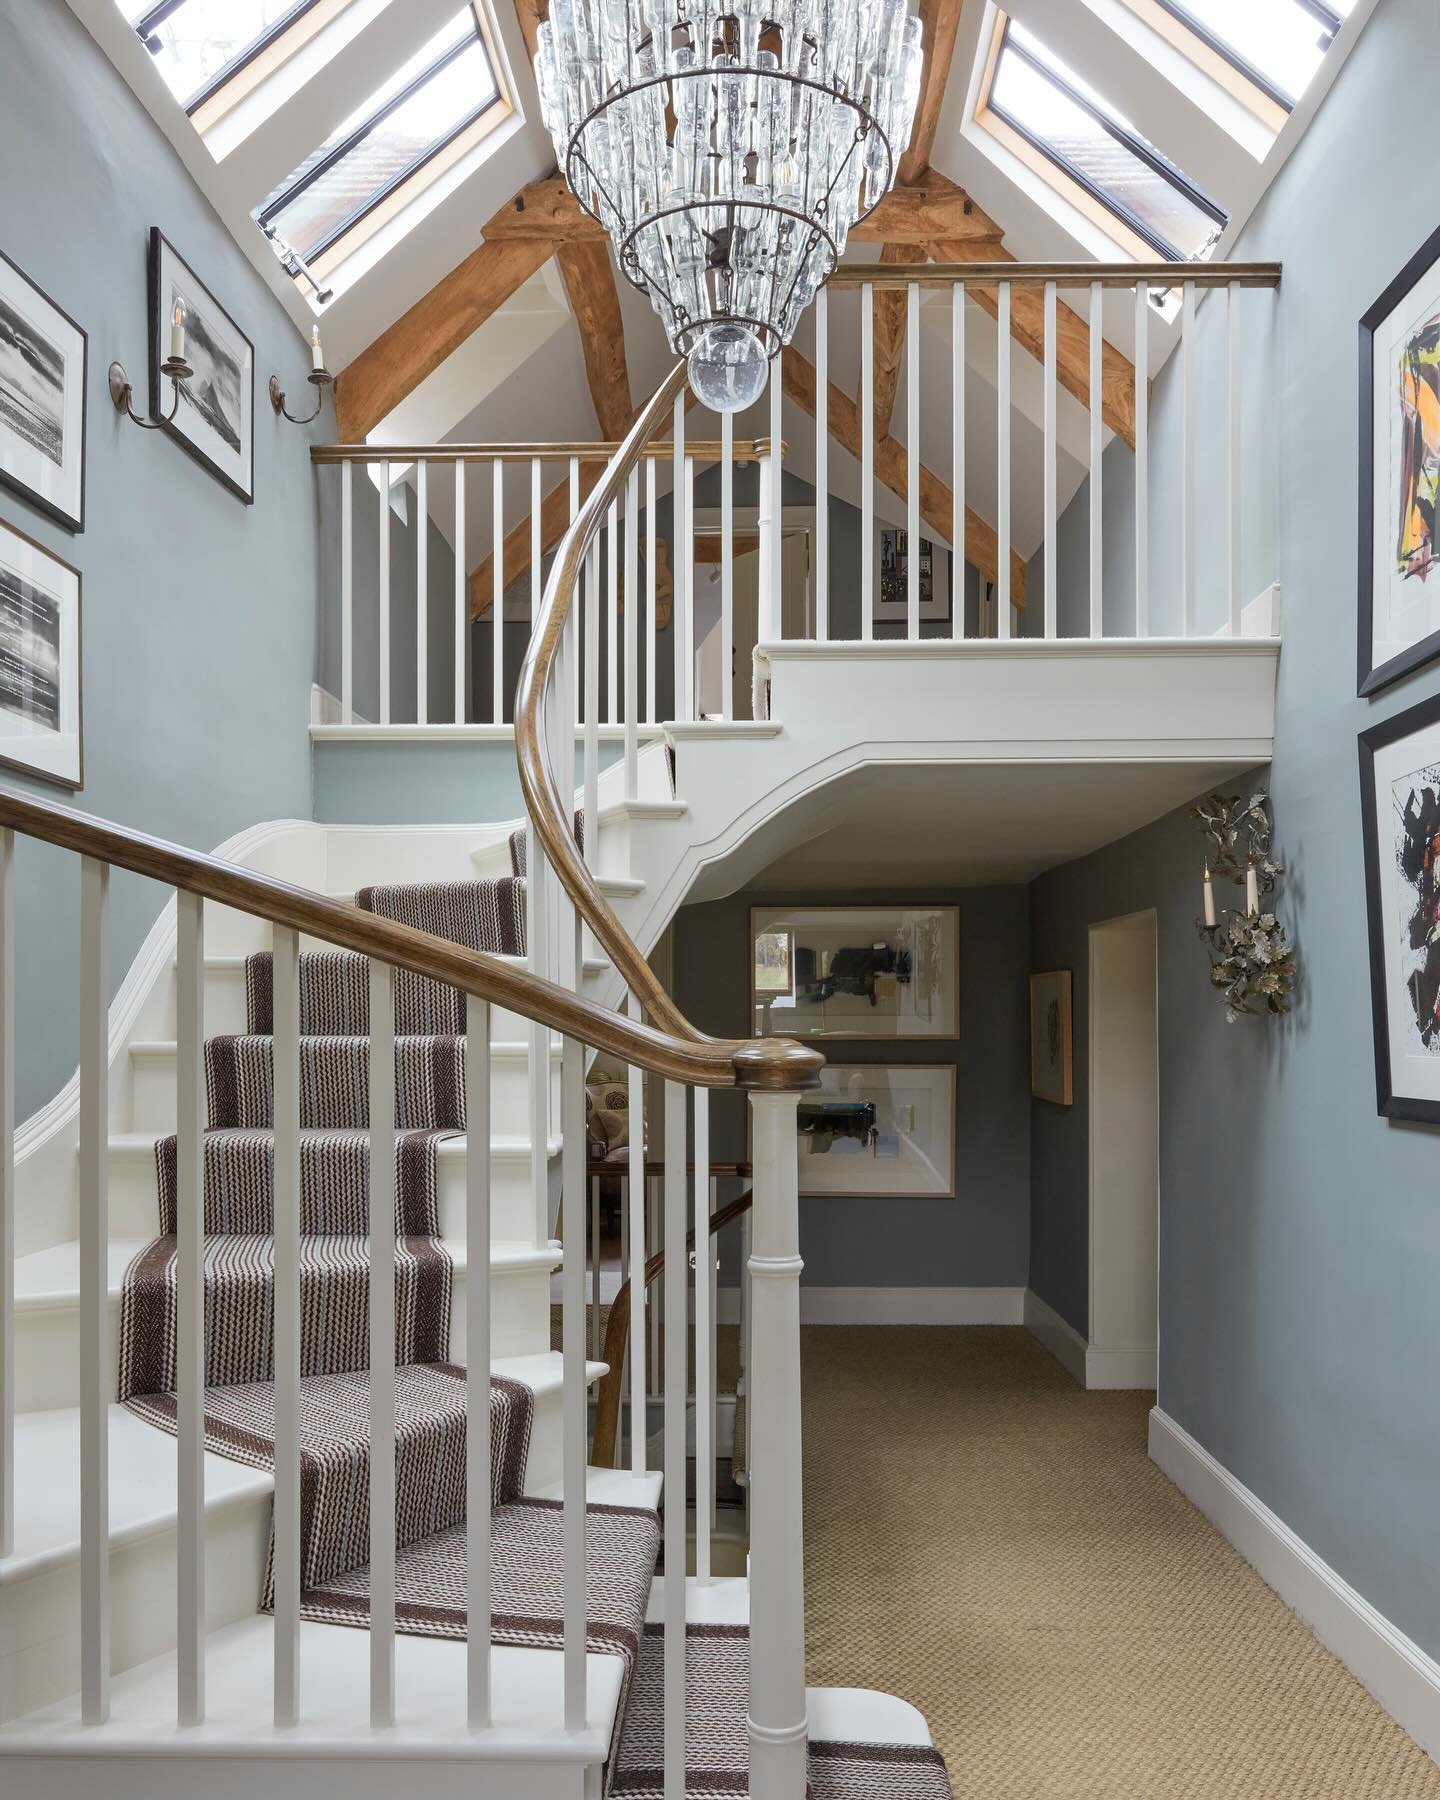 Let there be light. Adding conservation skylights and a new staircase transformed the upper floors in this Cotswolds farmhouse project - set off by a bottle chandelier. 📸 @james_mcdonald_photography #recentproject #farmhousechic #staircasedesign #co